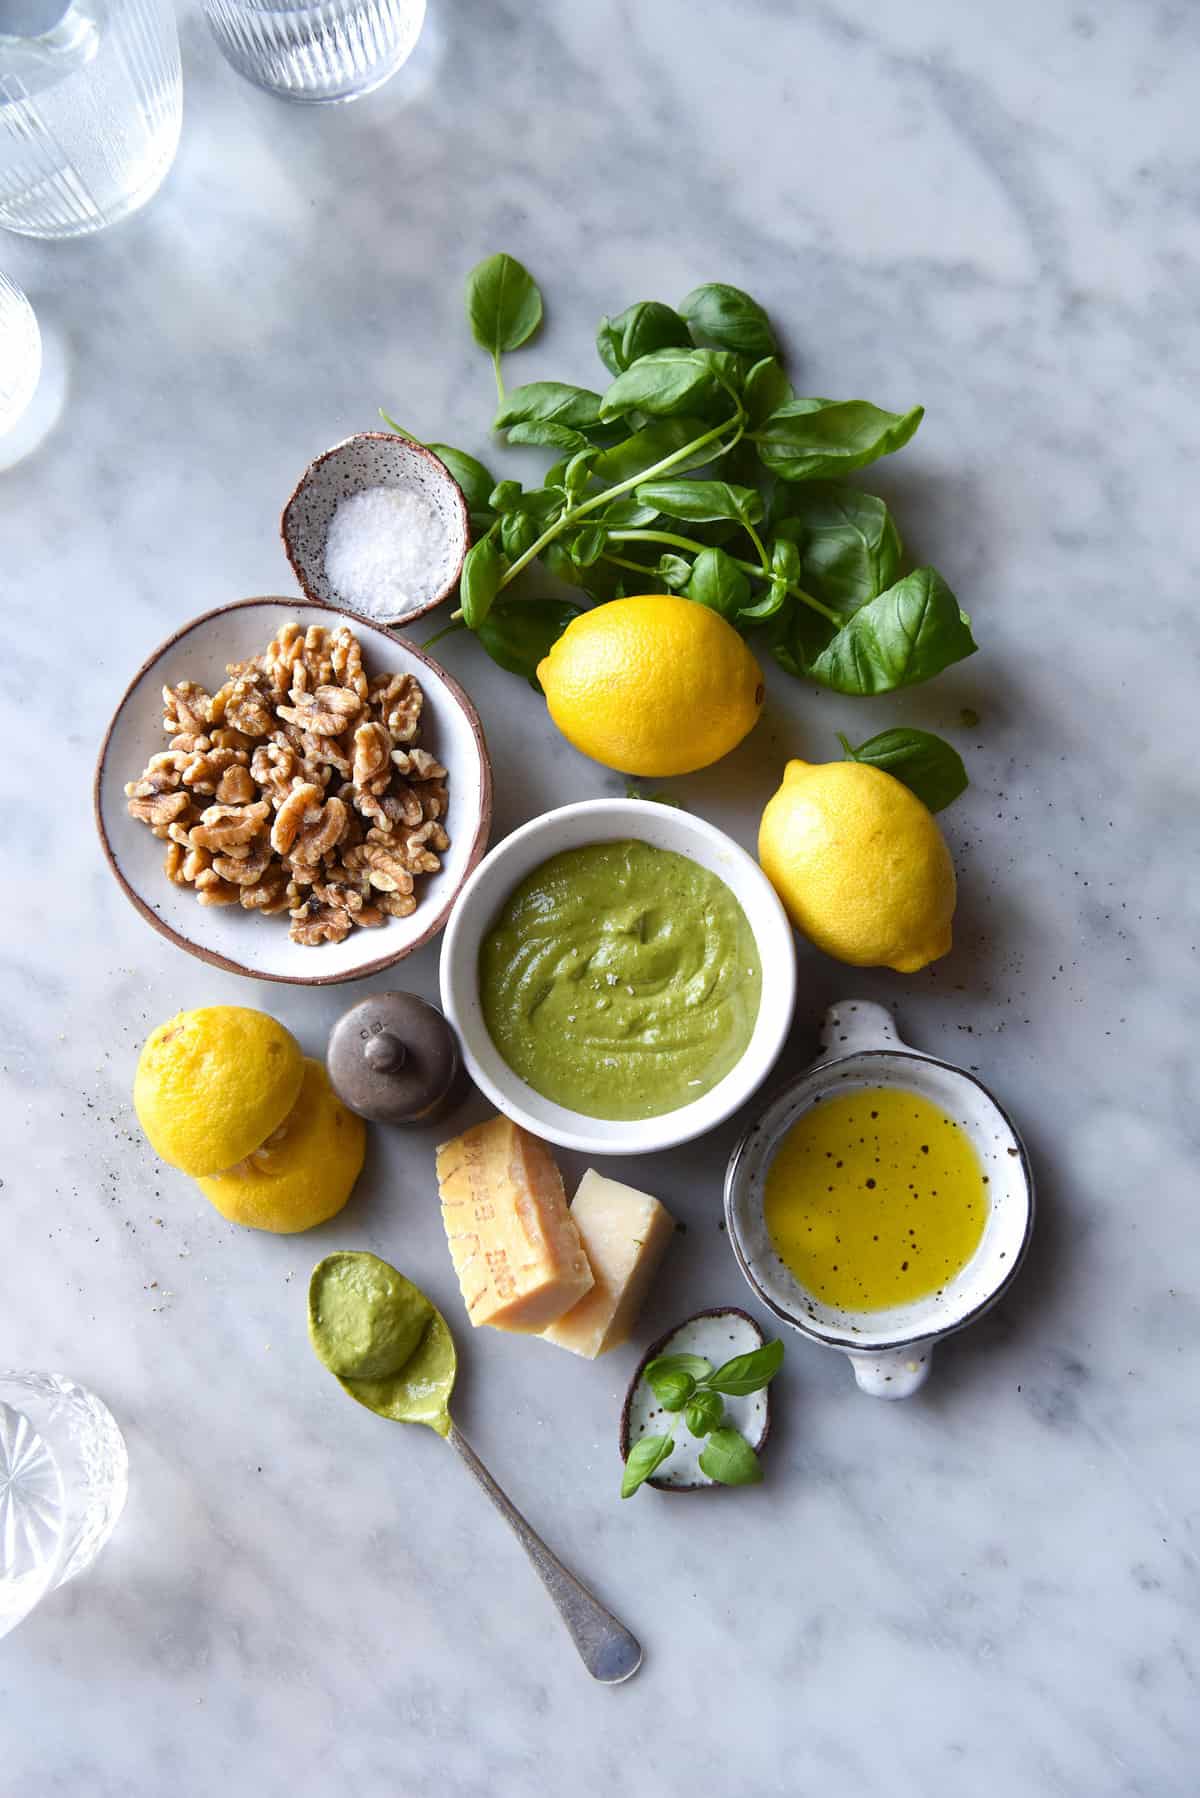 An aerial image of the ingredients used for a FODMAP friendly pesto arranged in a group on a white marble table